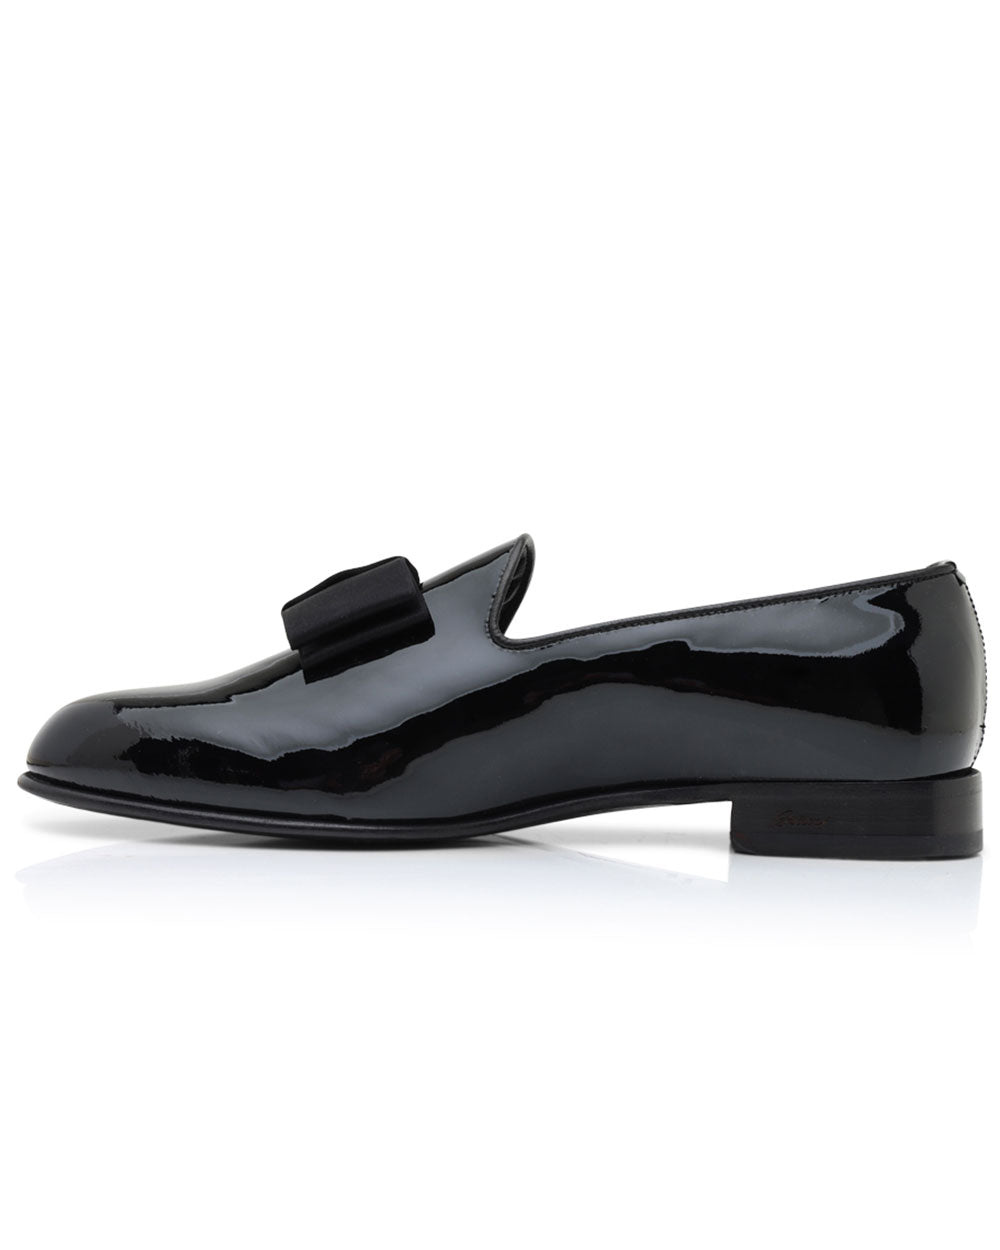 Patent Leather Formal Loafer with Bow Tie in Black